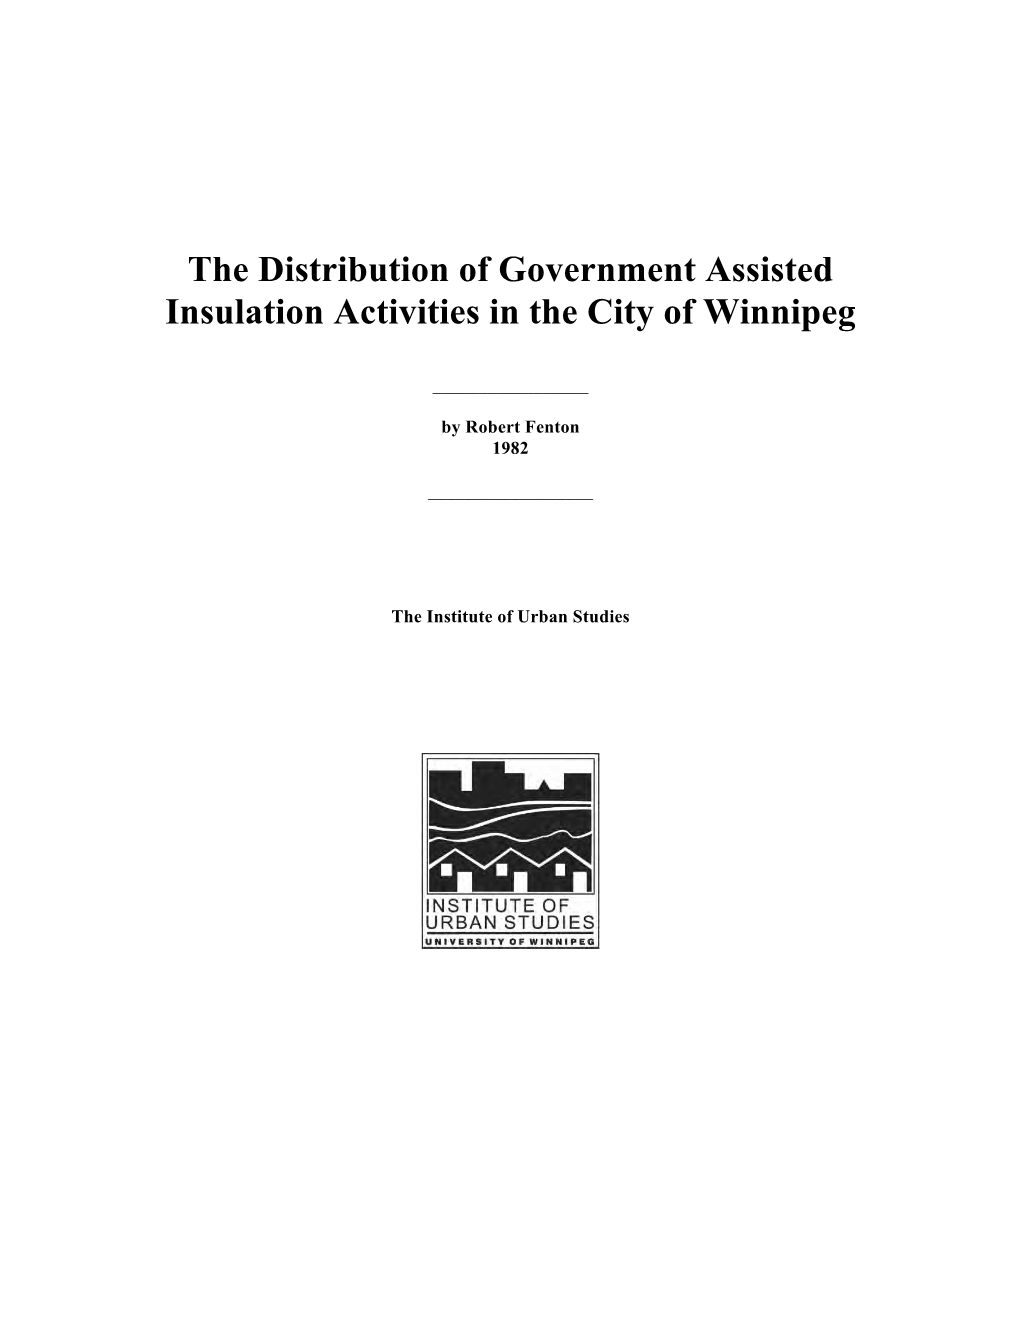 The Distribution of Government Assisted Insulation Activities in the City of Winnipeg